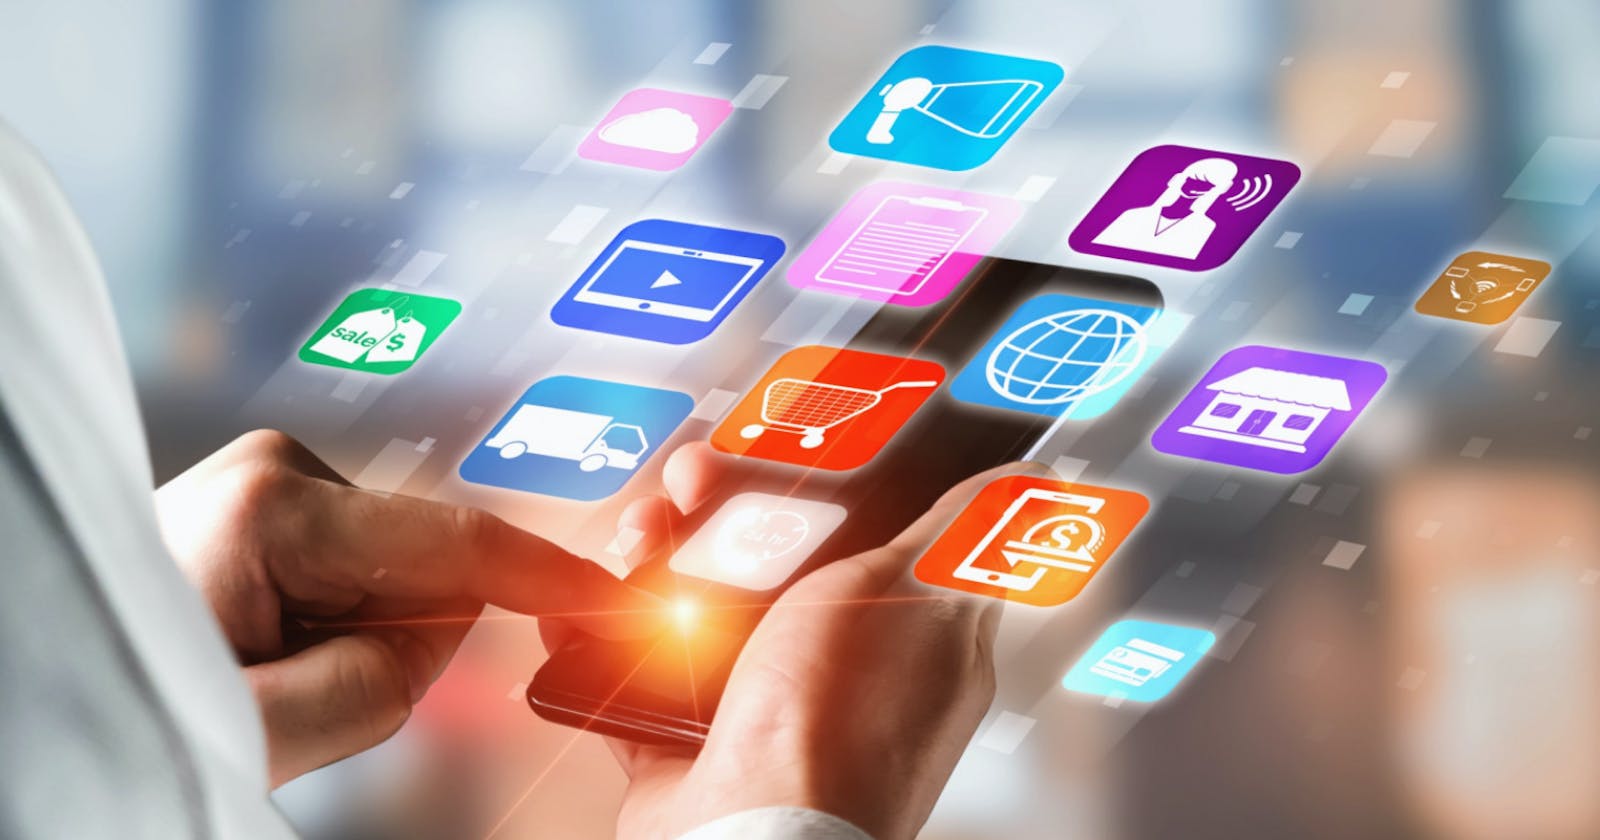 The Ultimate Guide To Mobile Application Development 2022